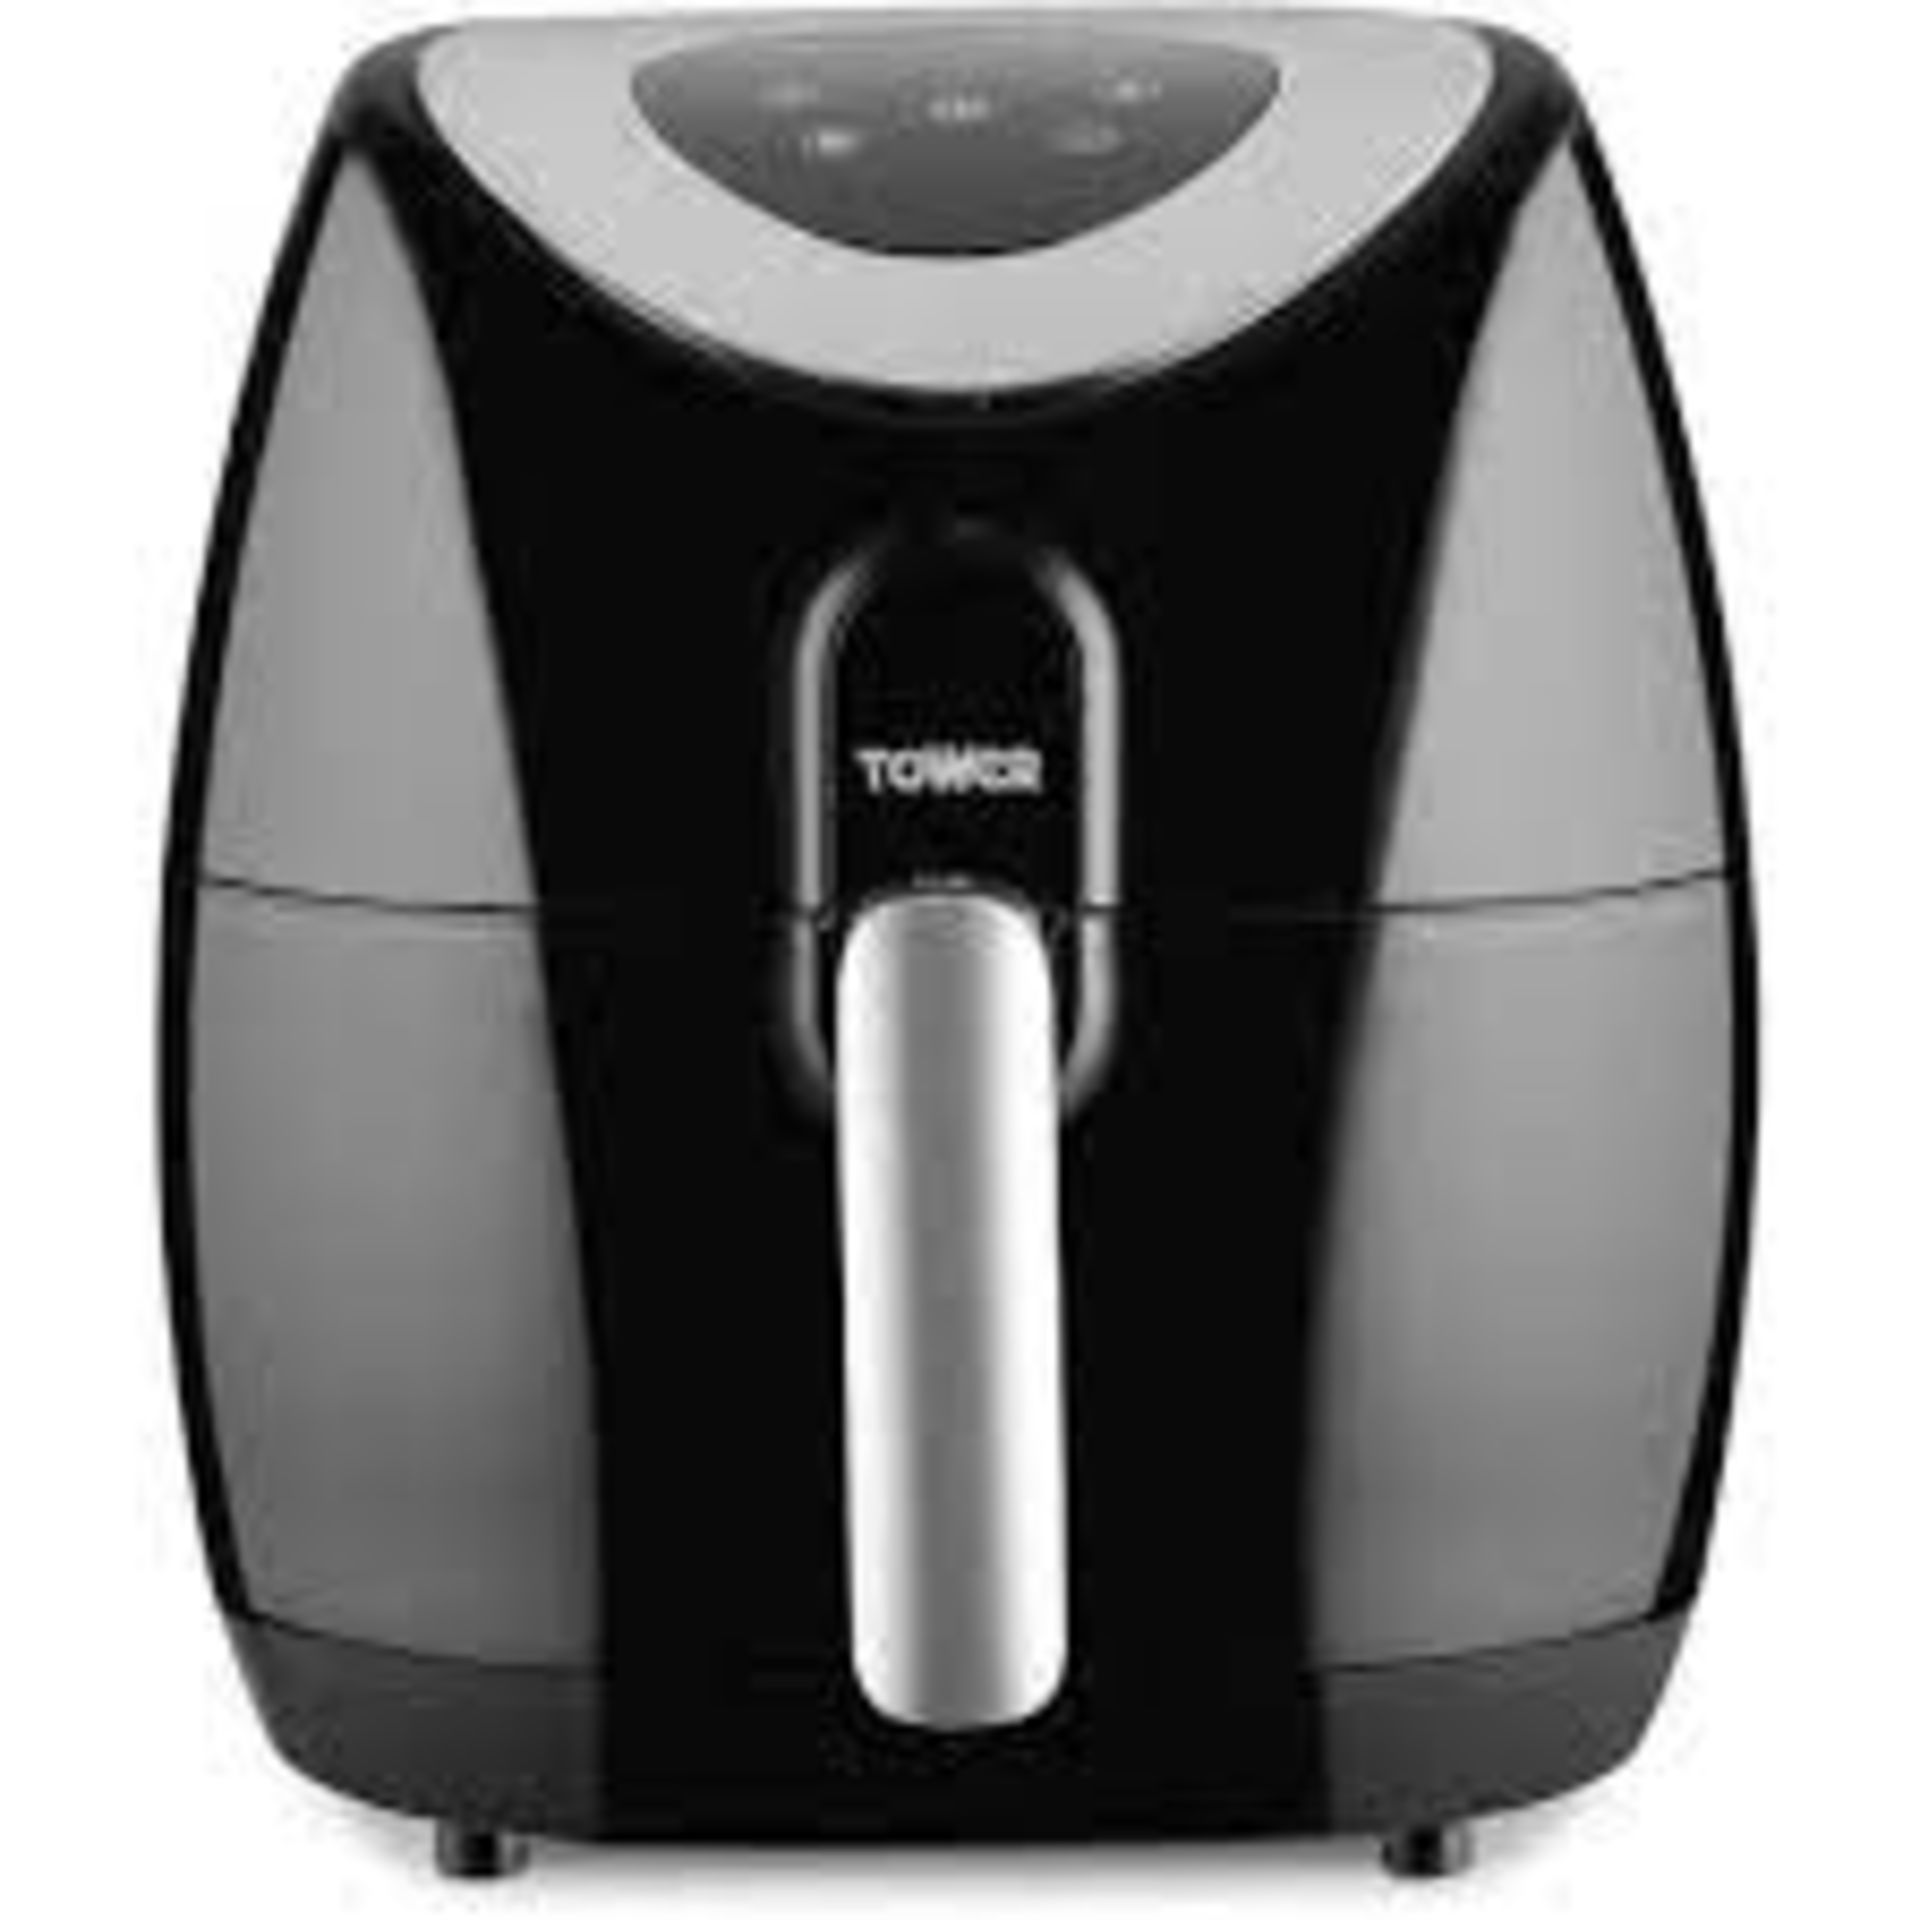 Tower T17024 Digital Air Fryer Oven with Rapid Air Circulation and 60 Min Timer, 4.3 Litre,